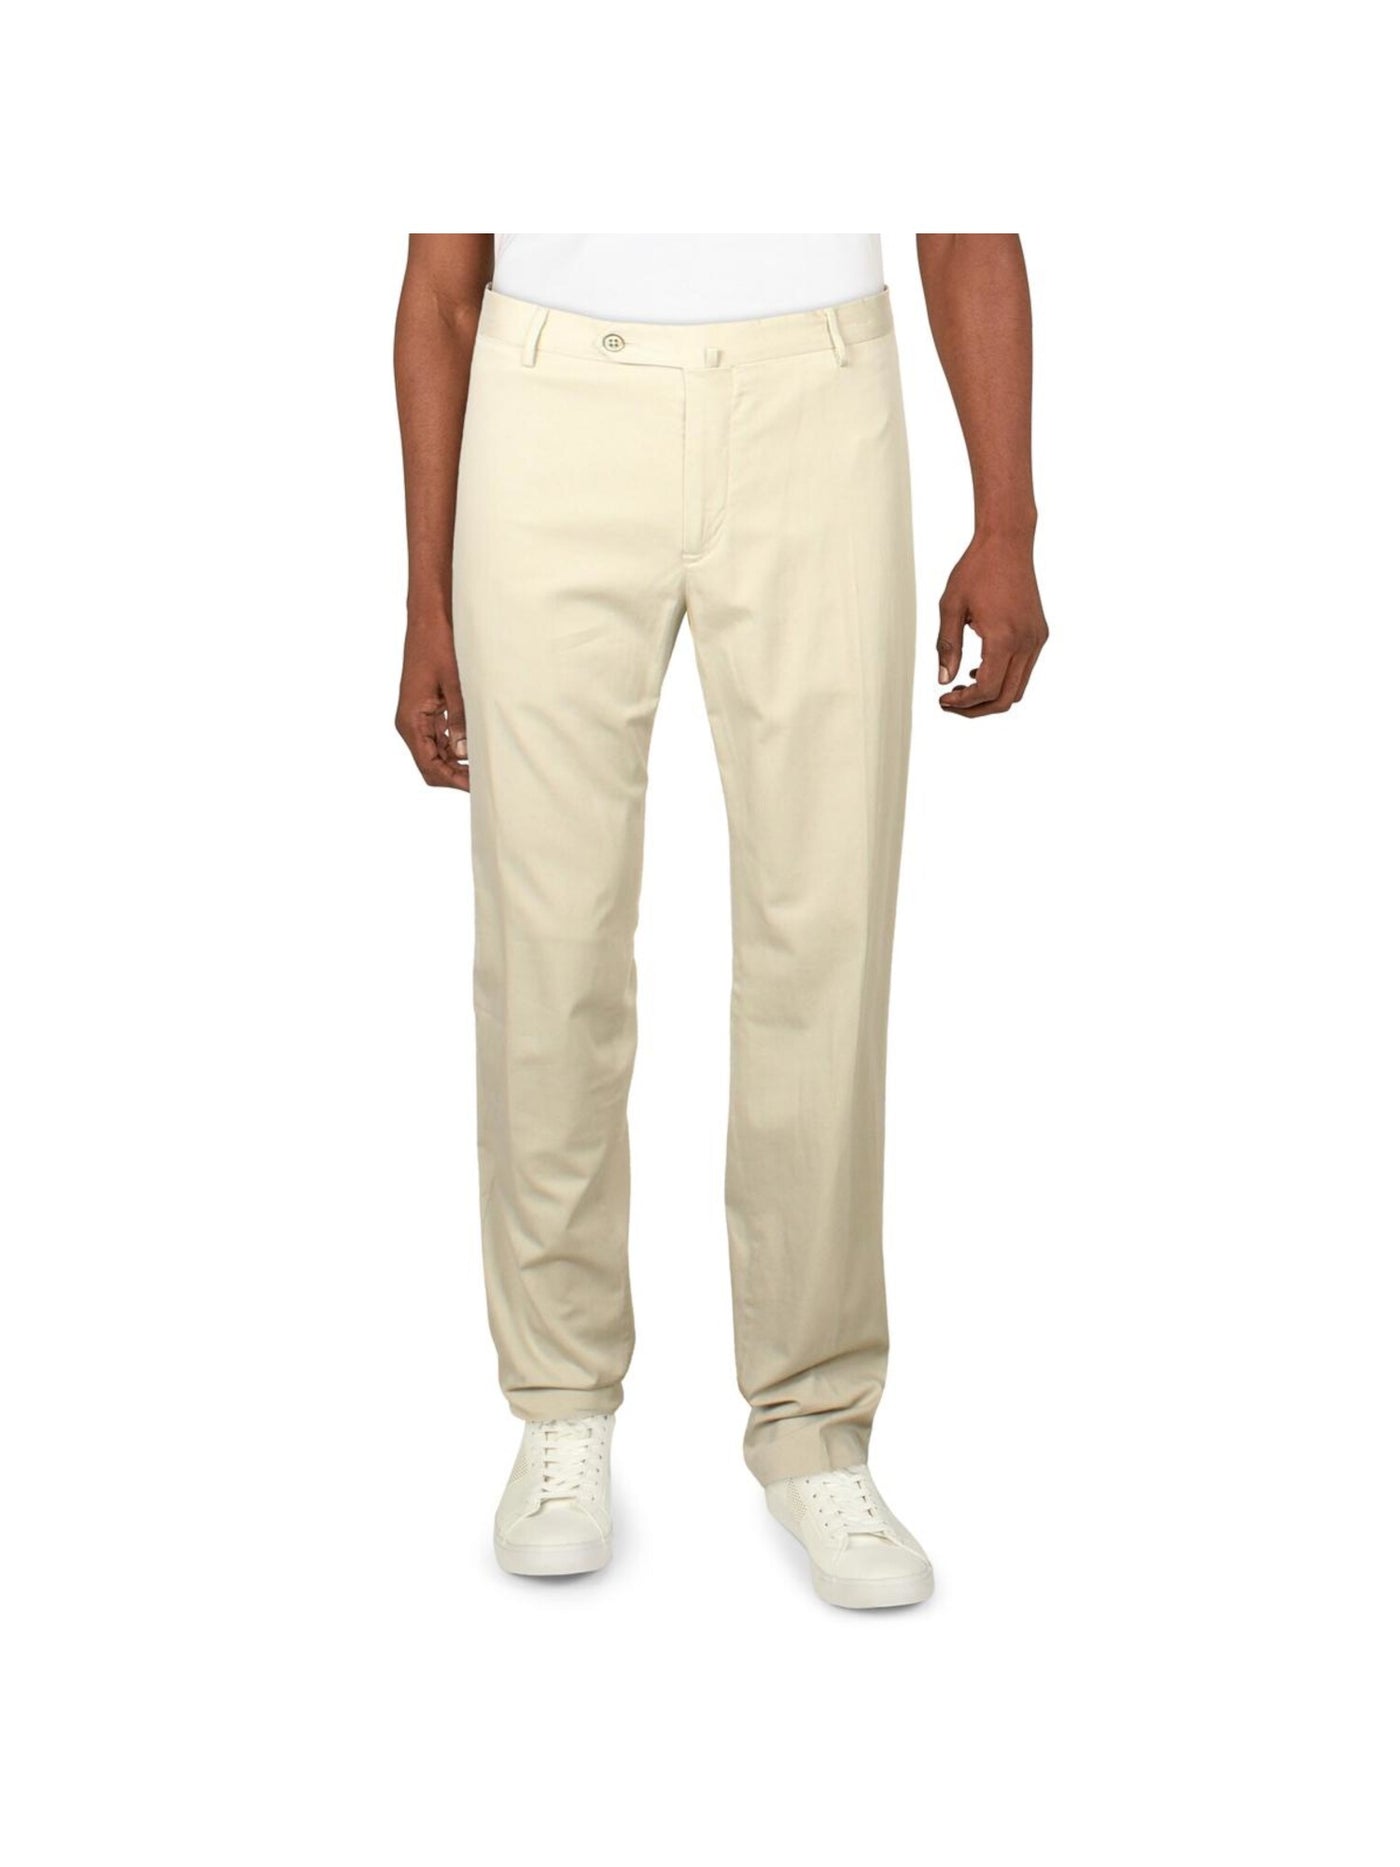 TORIN OPIFICIO Mens White Flat Front, Stretch, Chino Pants 48